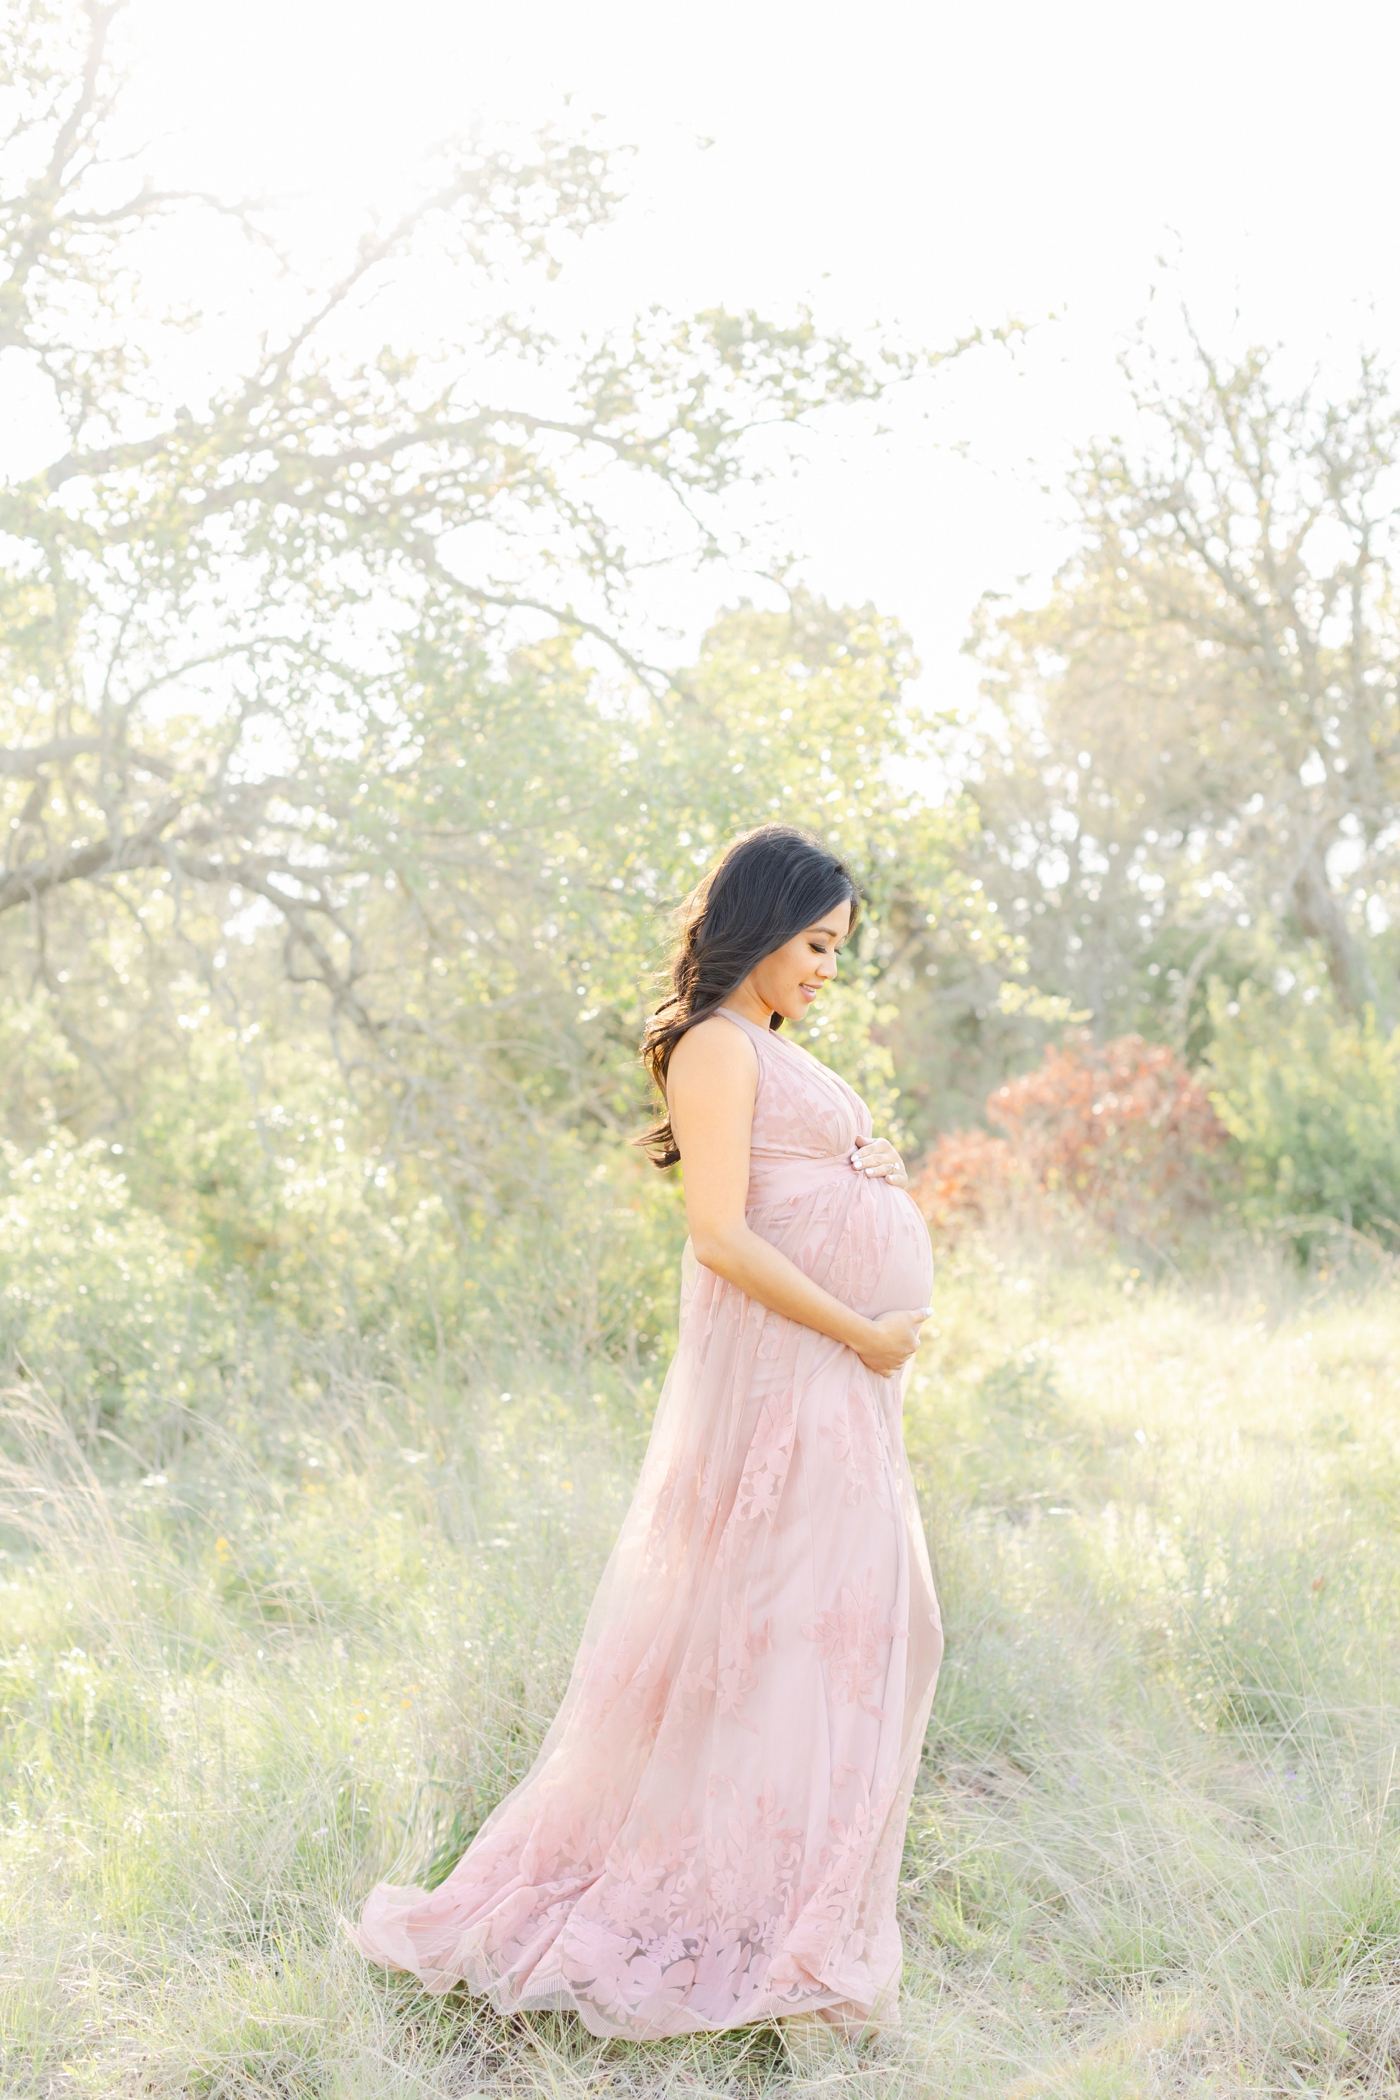 Image of pregnant Mom looking at baby bump during sunny photoshoot with Sana Ahmed Photography.